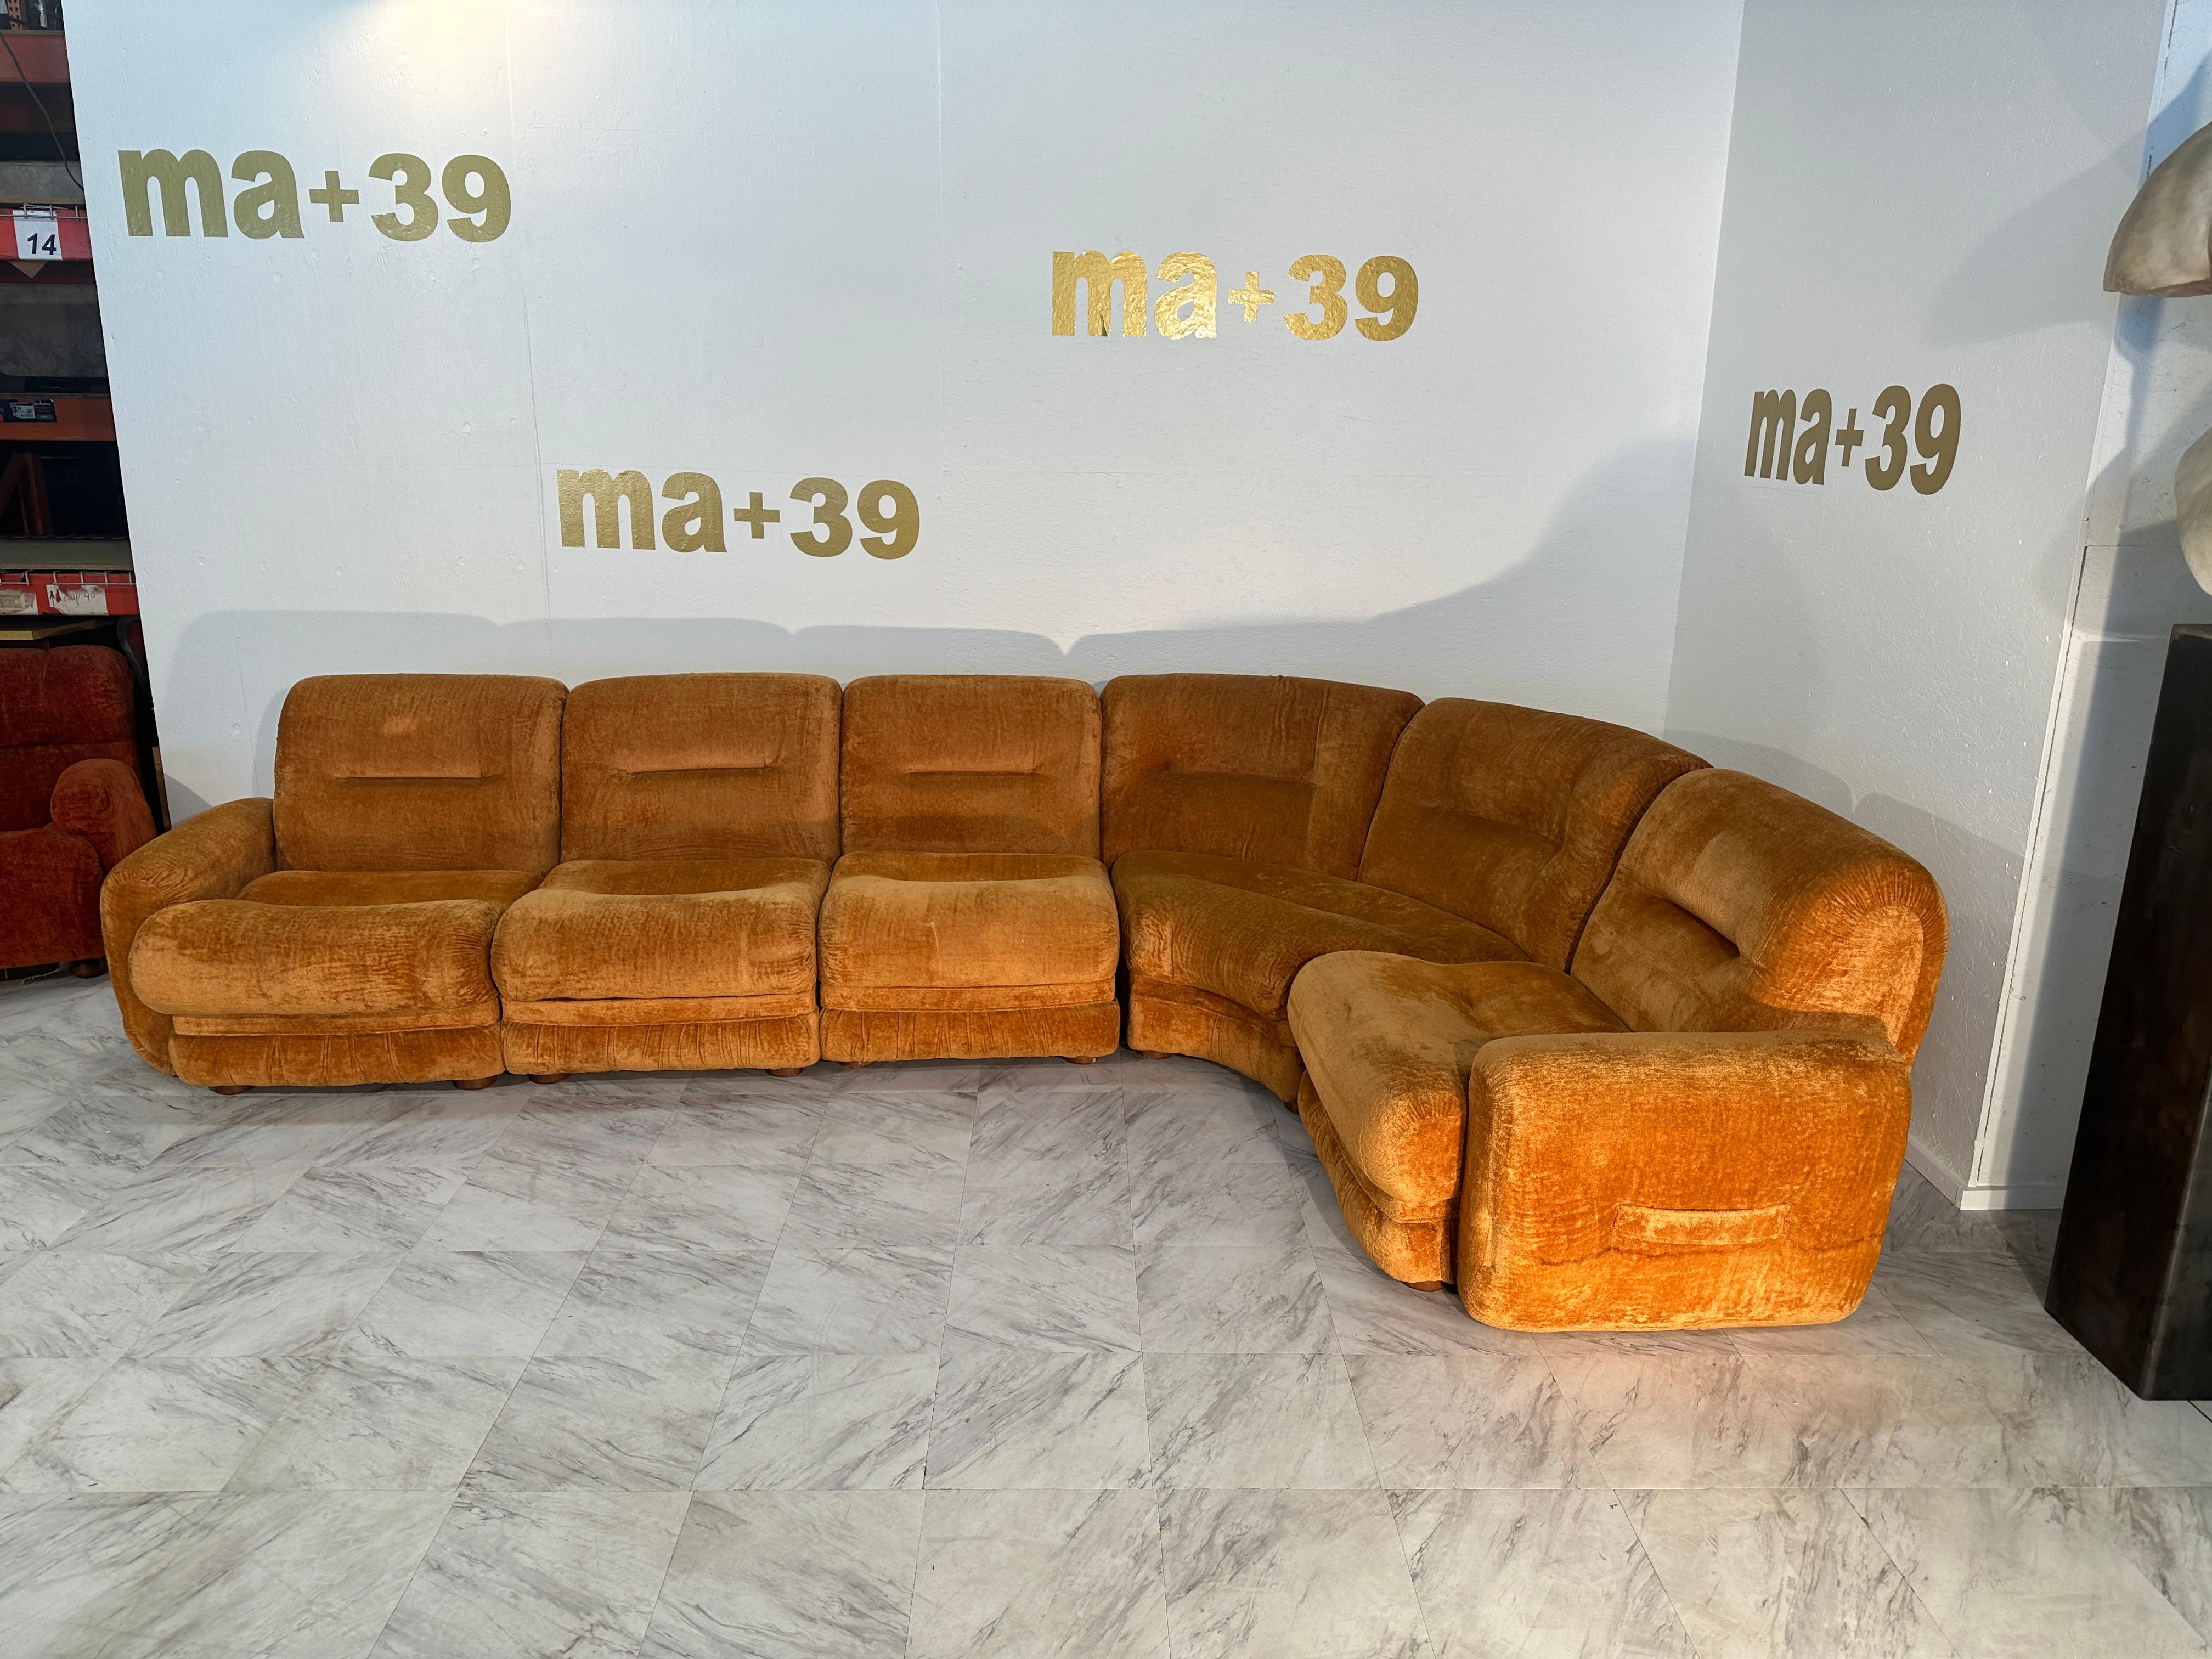 The Beautiful Italian Mid Century Sectional Sofa from the 1980s is a stunning piece that embodies the design aesthetics of that era. The sofa features its original orange fabric, adding a vibrant and retro touch to the overall look. With a